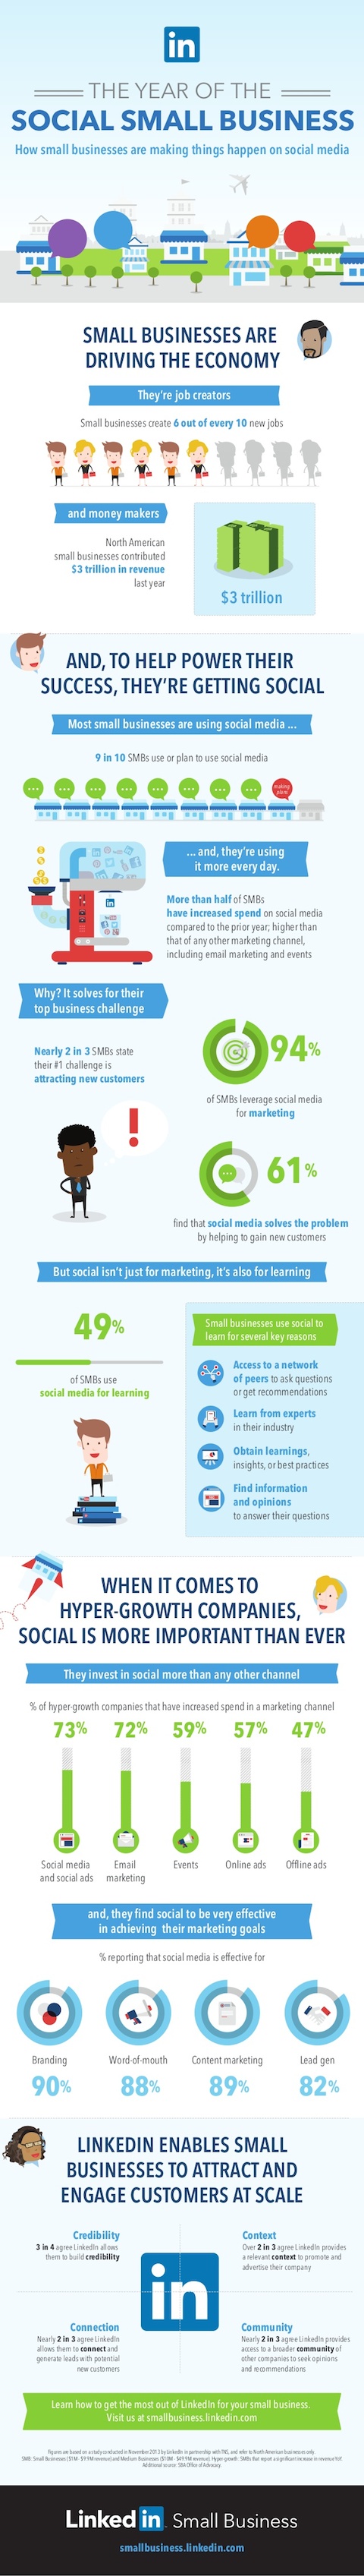 linkedin small business infographic